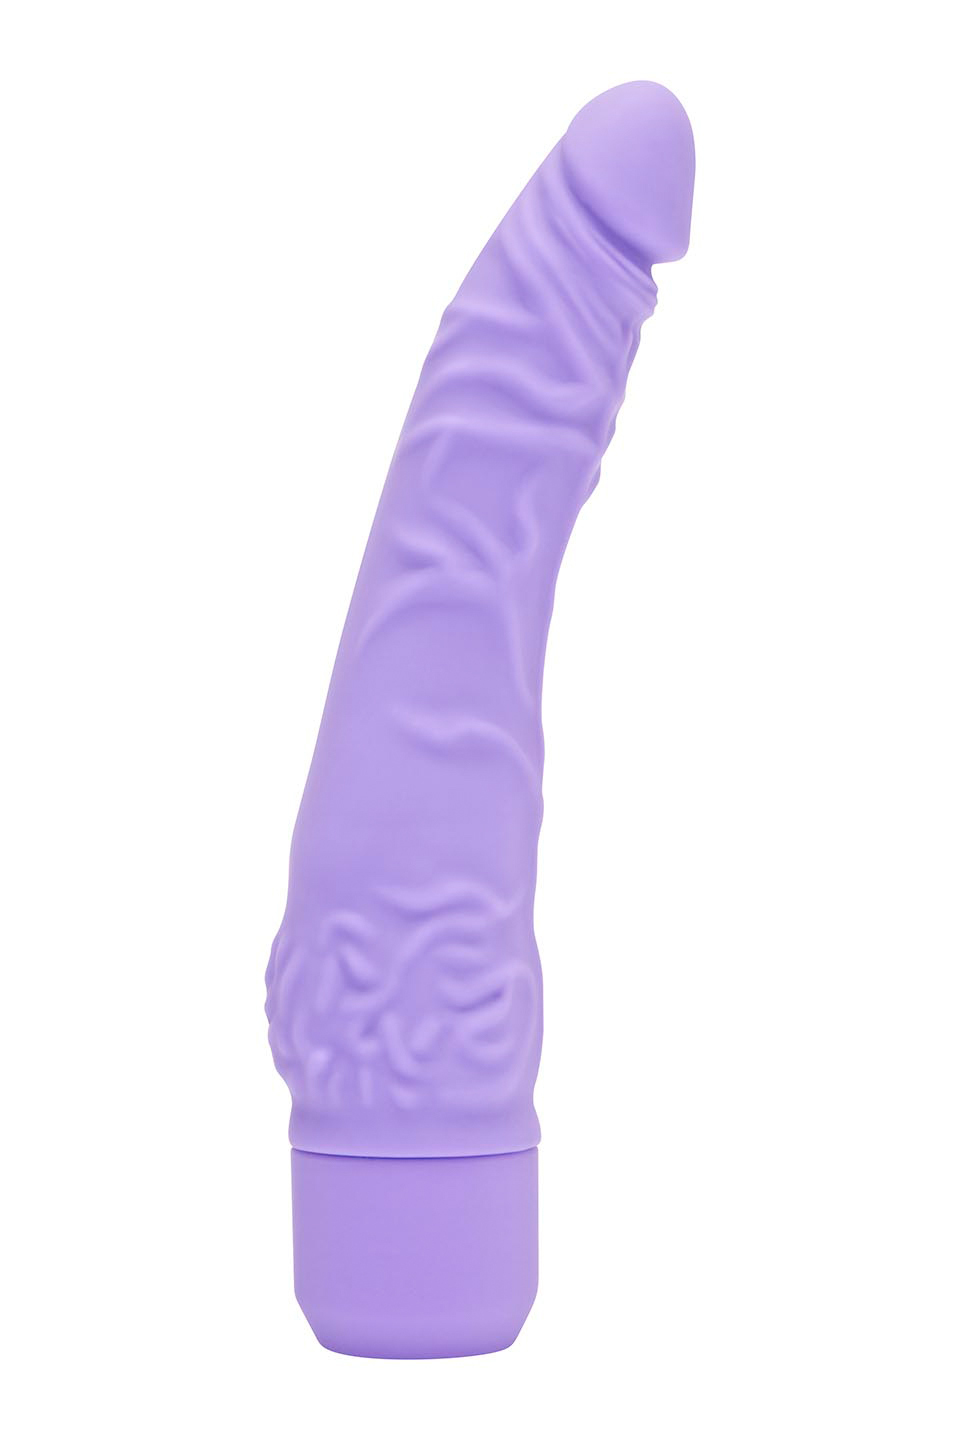 Get Real by TOYJOY Vibrator Silicone Classic